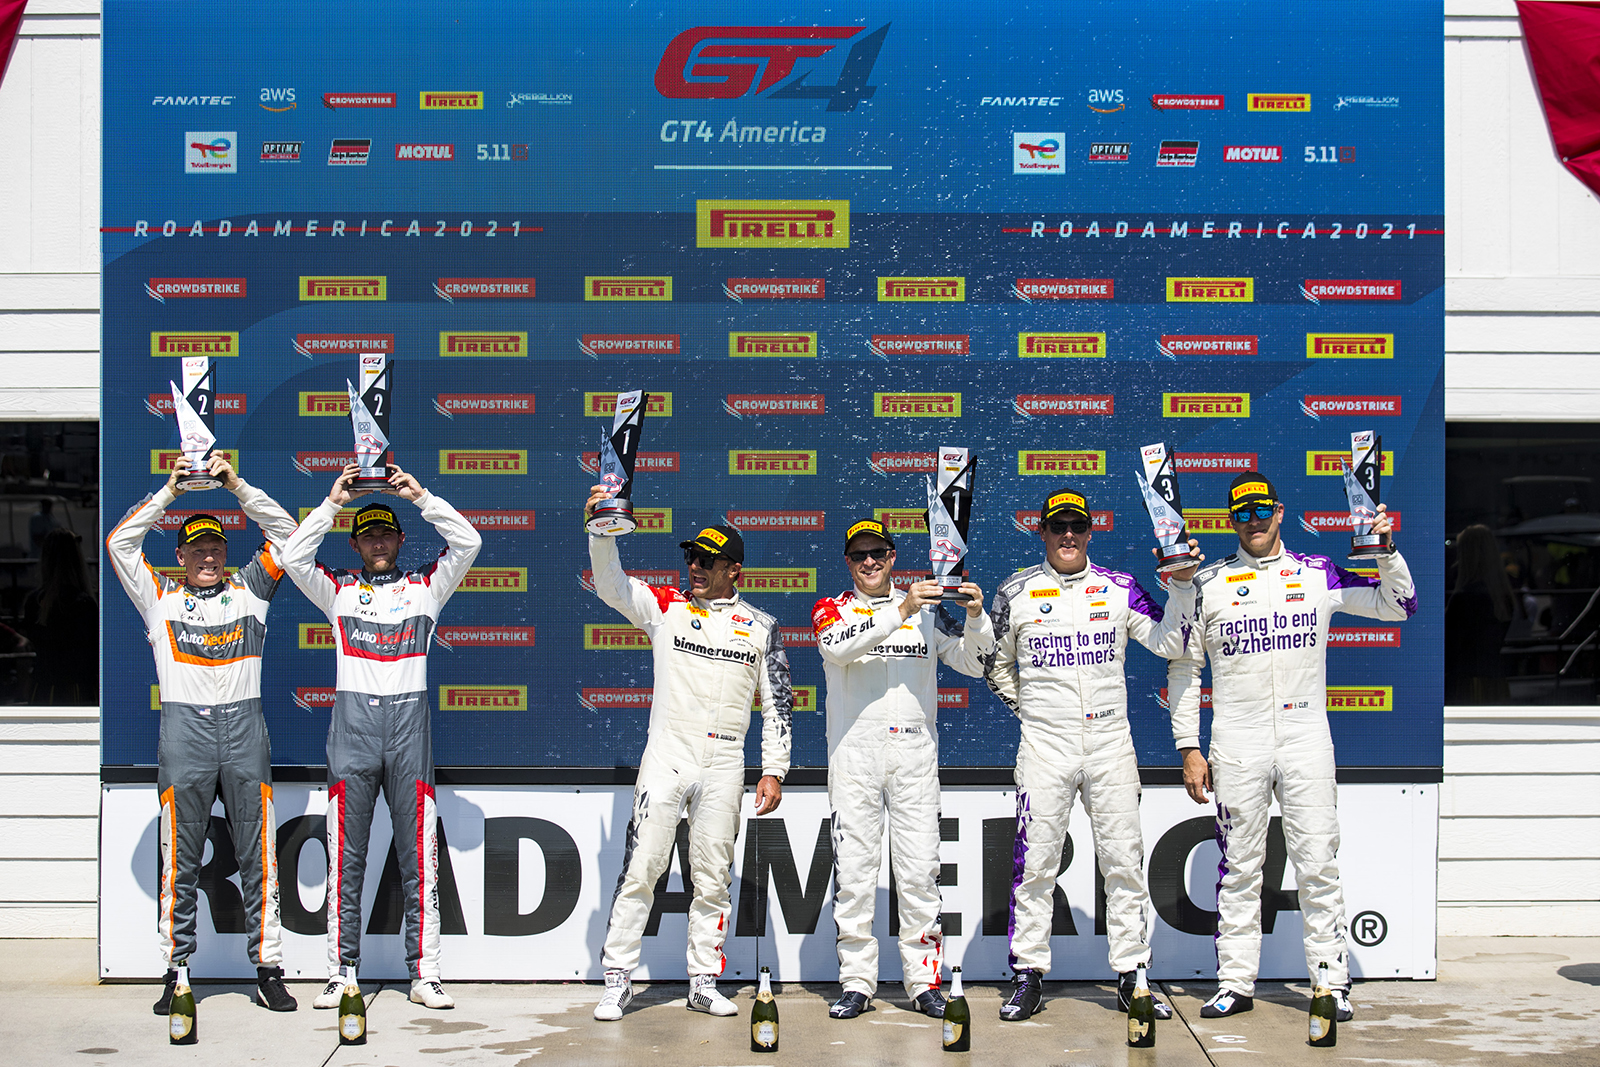 BimmerWorld drivers on the podium at Road America in first and third